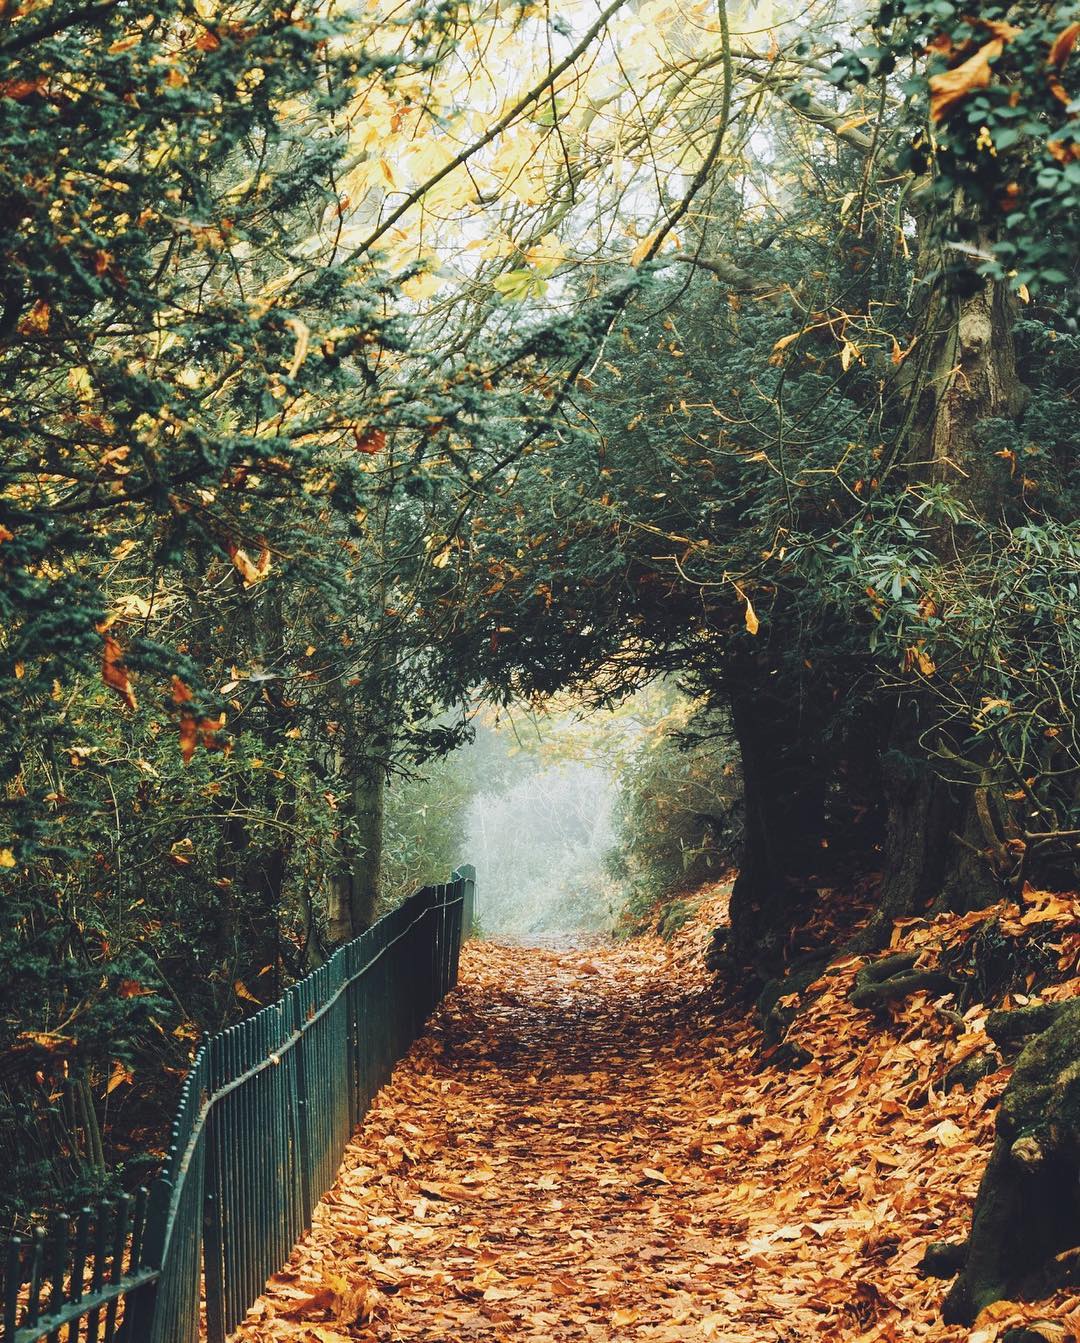 5 Classic Shots to Capture the Beauty of Autumn with Daniel Casson